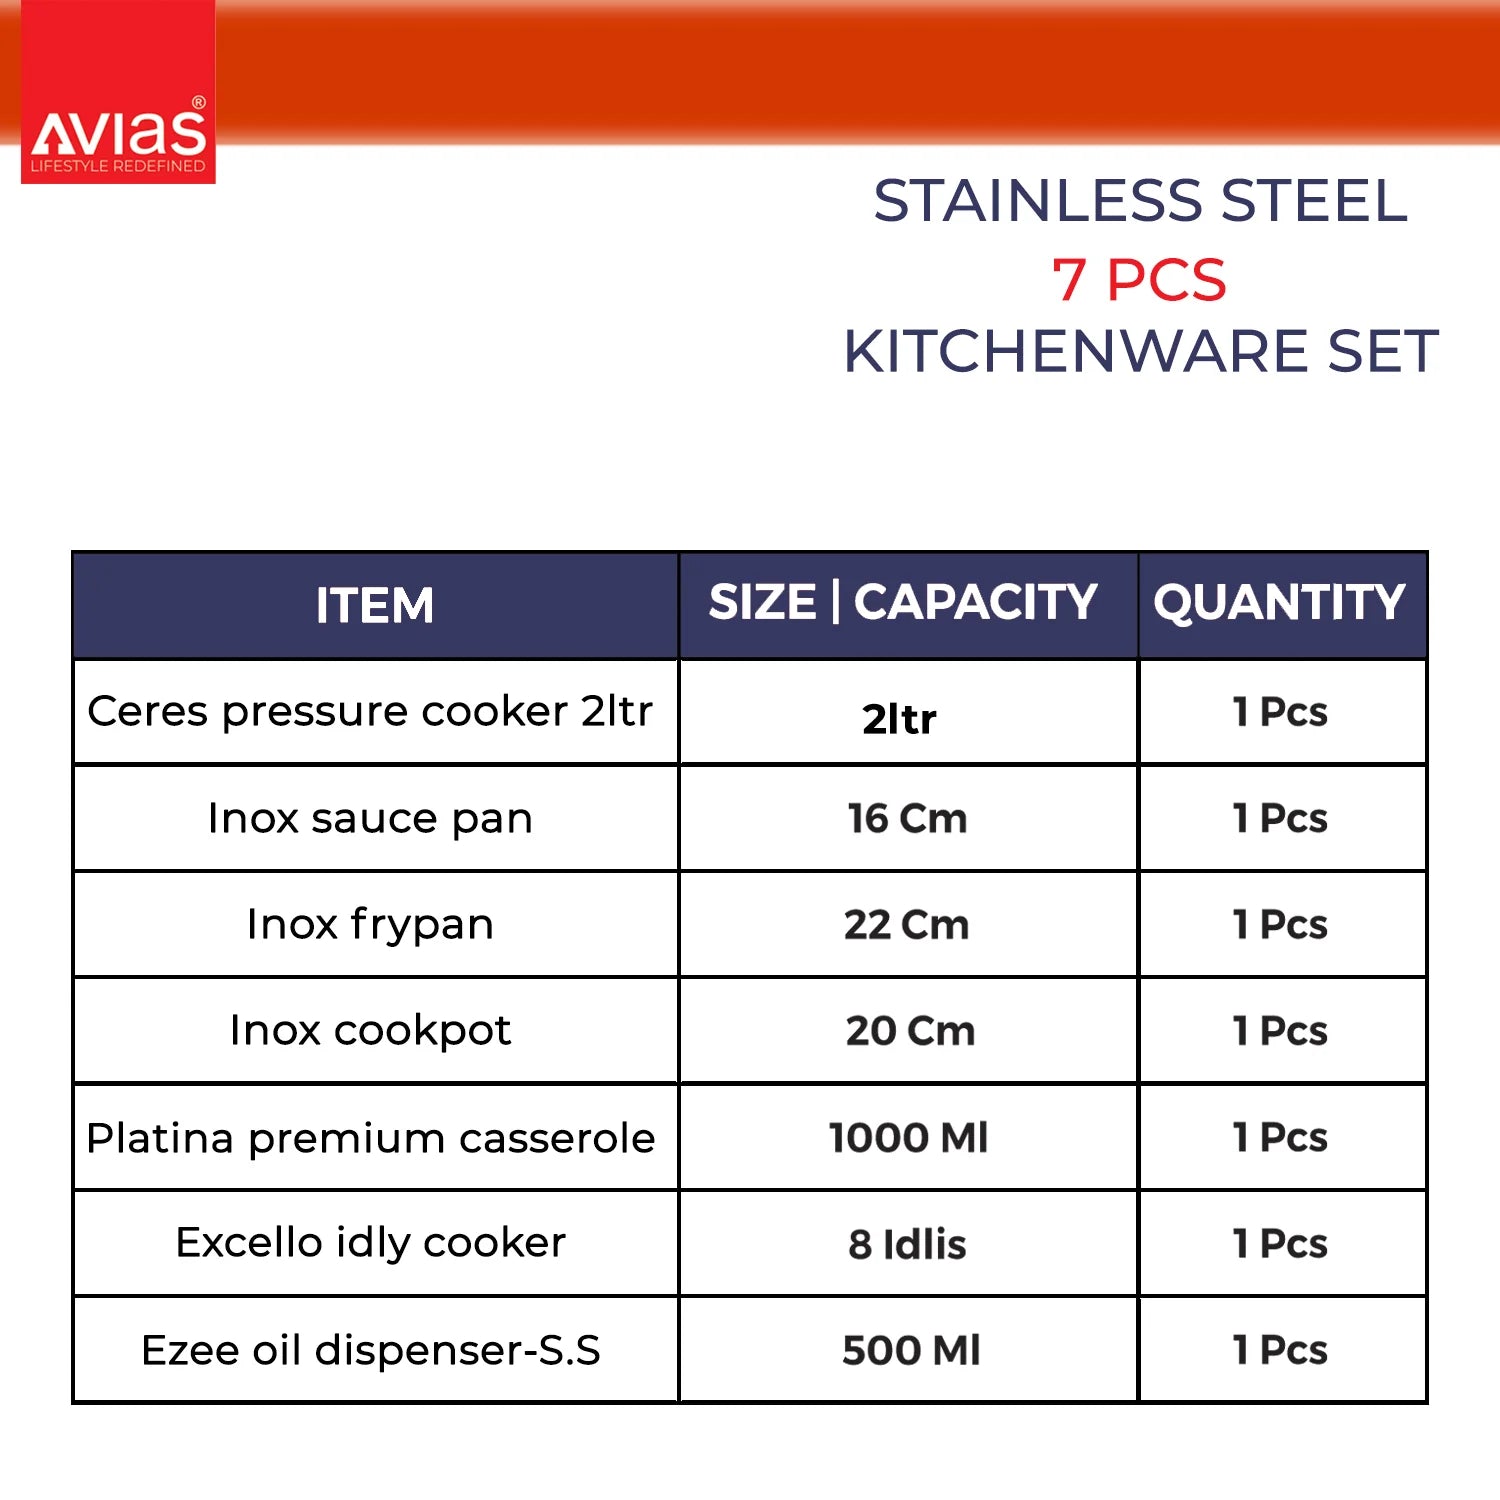 Avias Stainless Steel kitchenware/ cookware 7 PCS Kitchen set  size and quantity